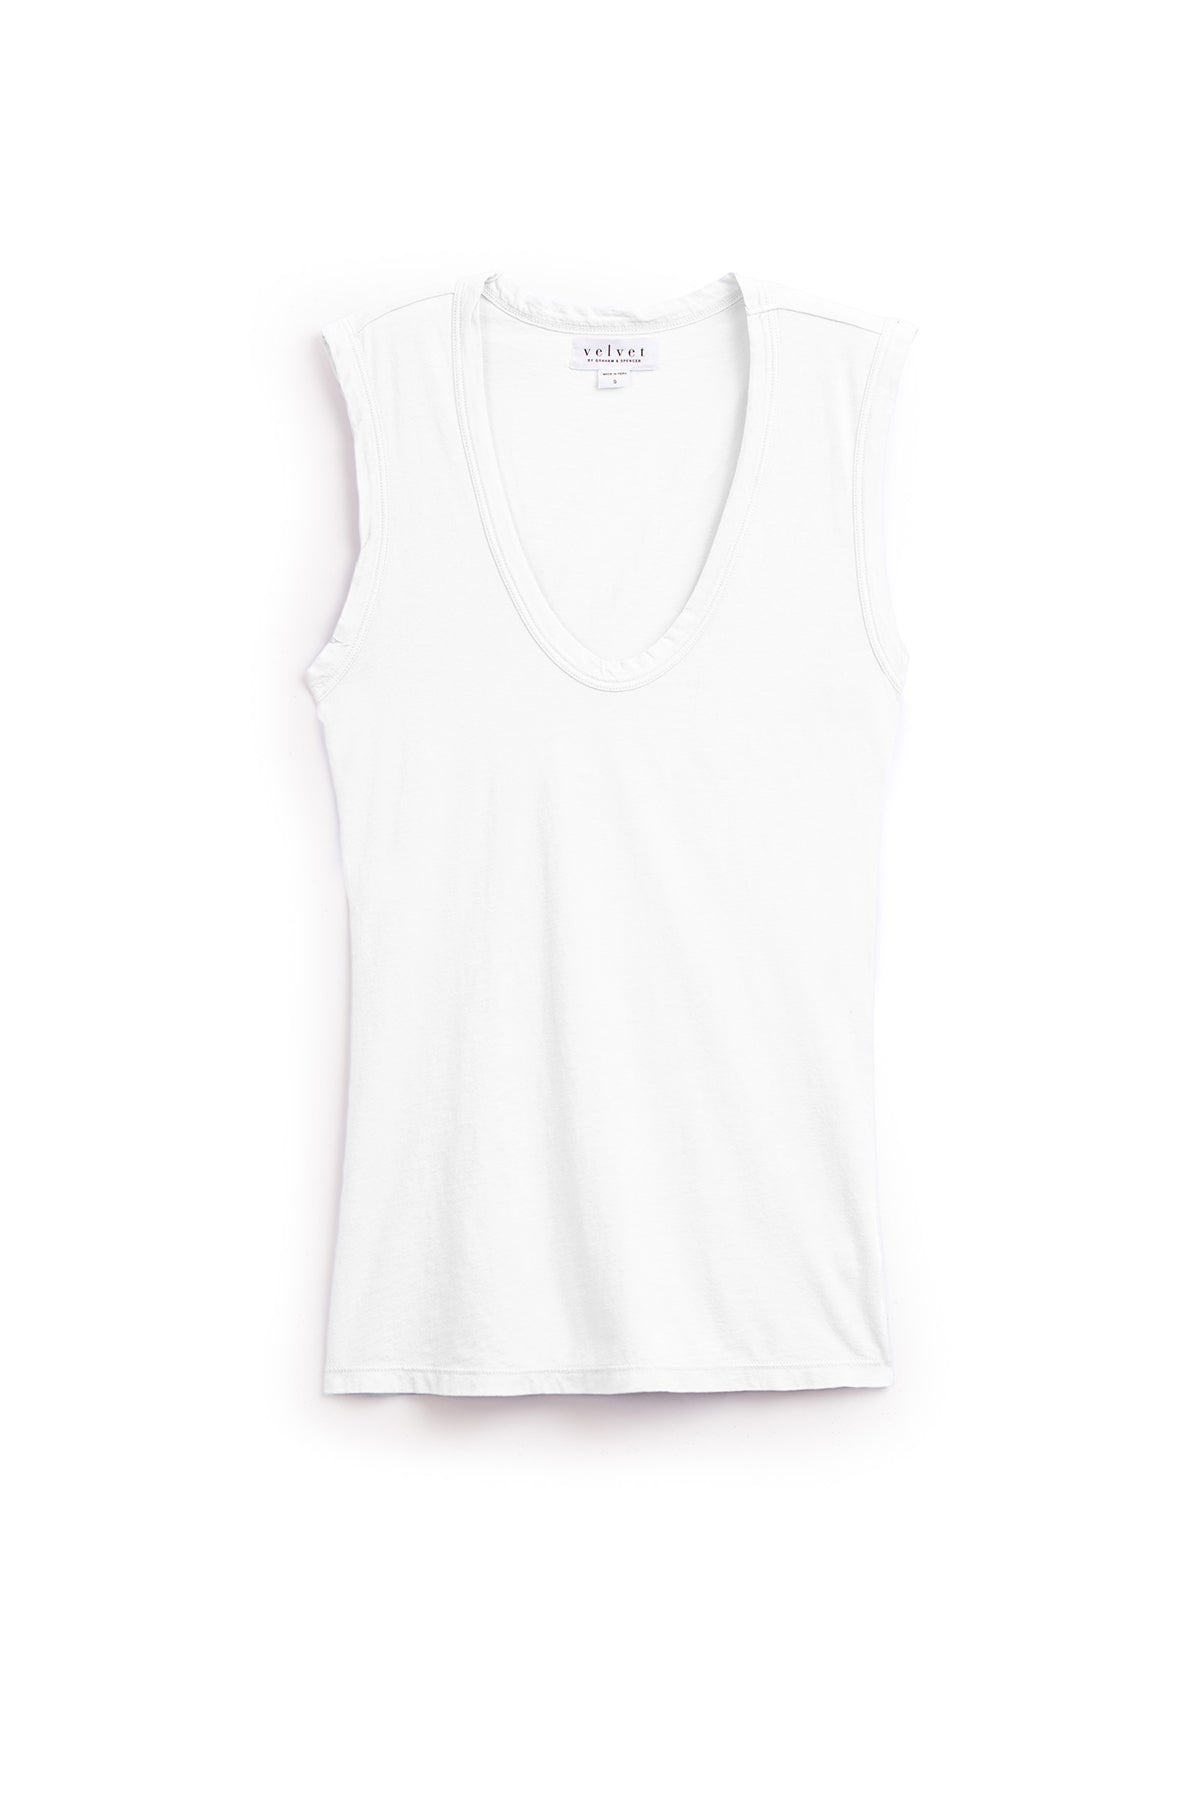 A sleeveless white V-neck top displayed against a plain white background exudes effortless style, featuring a laid-back tank design with soft gauzy whisper fabric: the ESTINA TANK TOP by Velvet by Graham & Spencer.-35413220098241